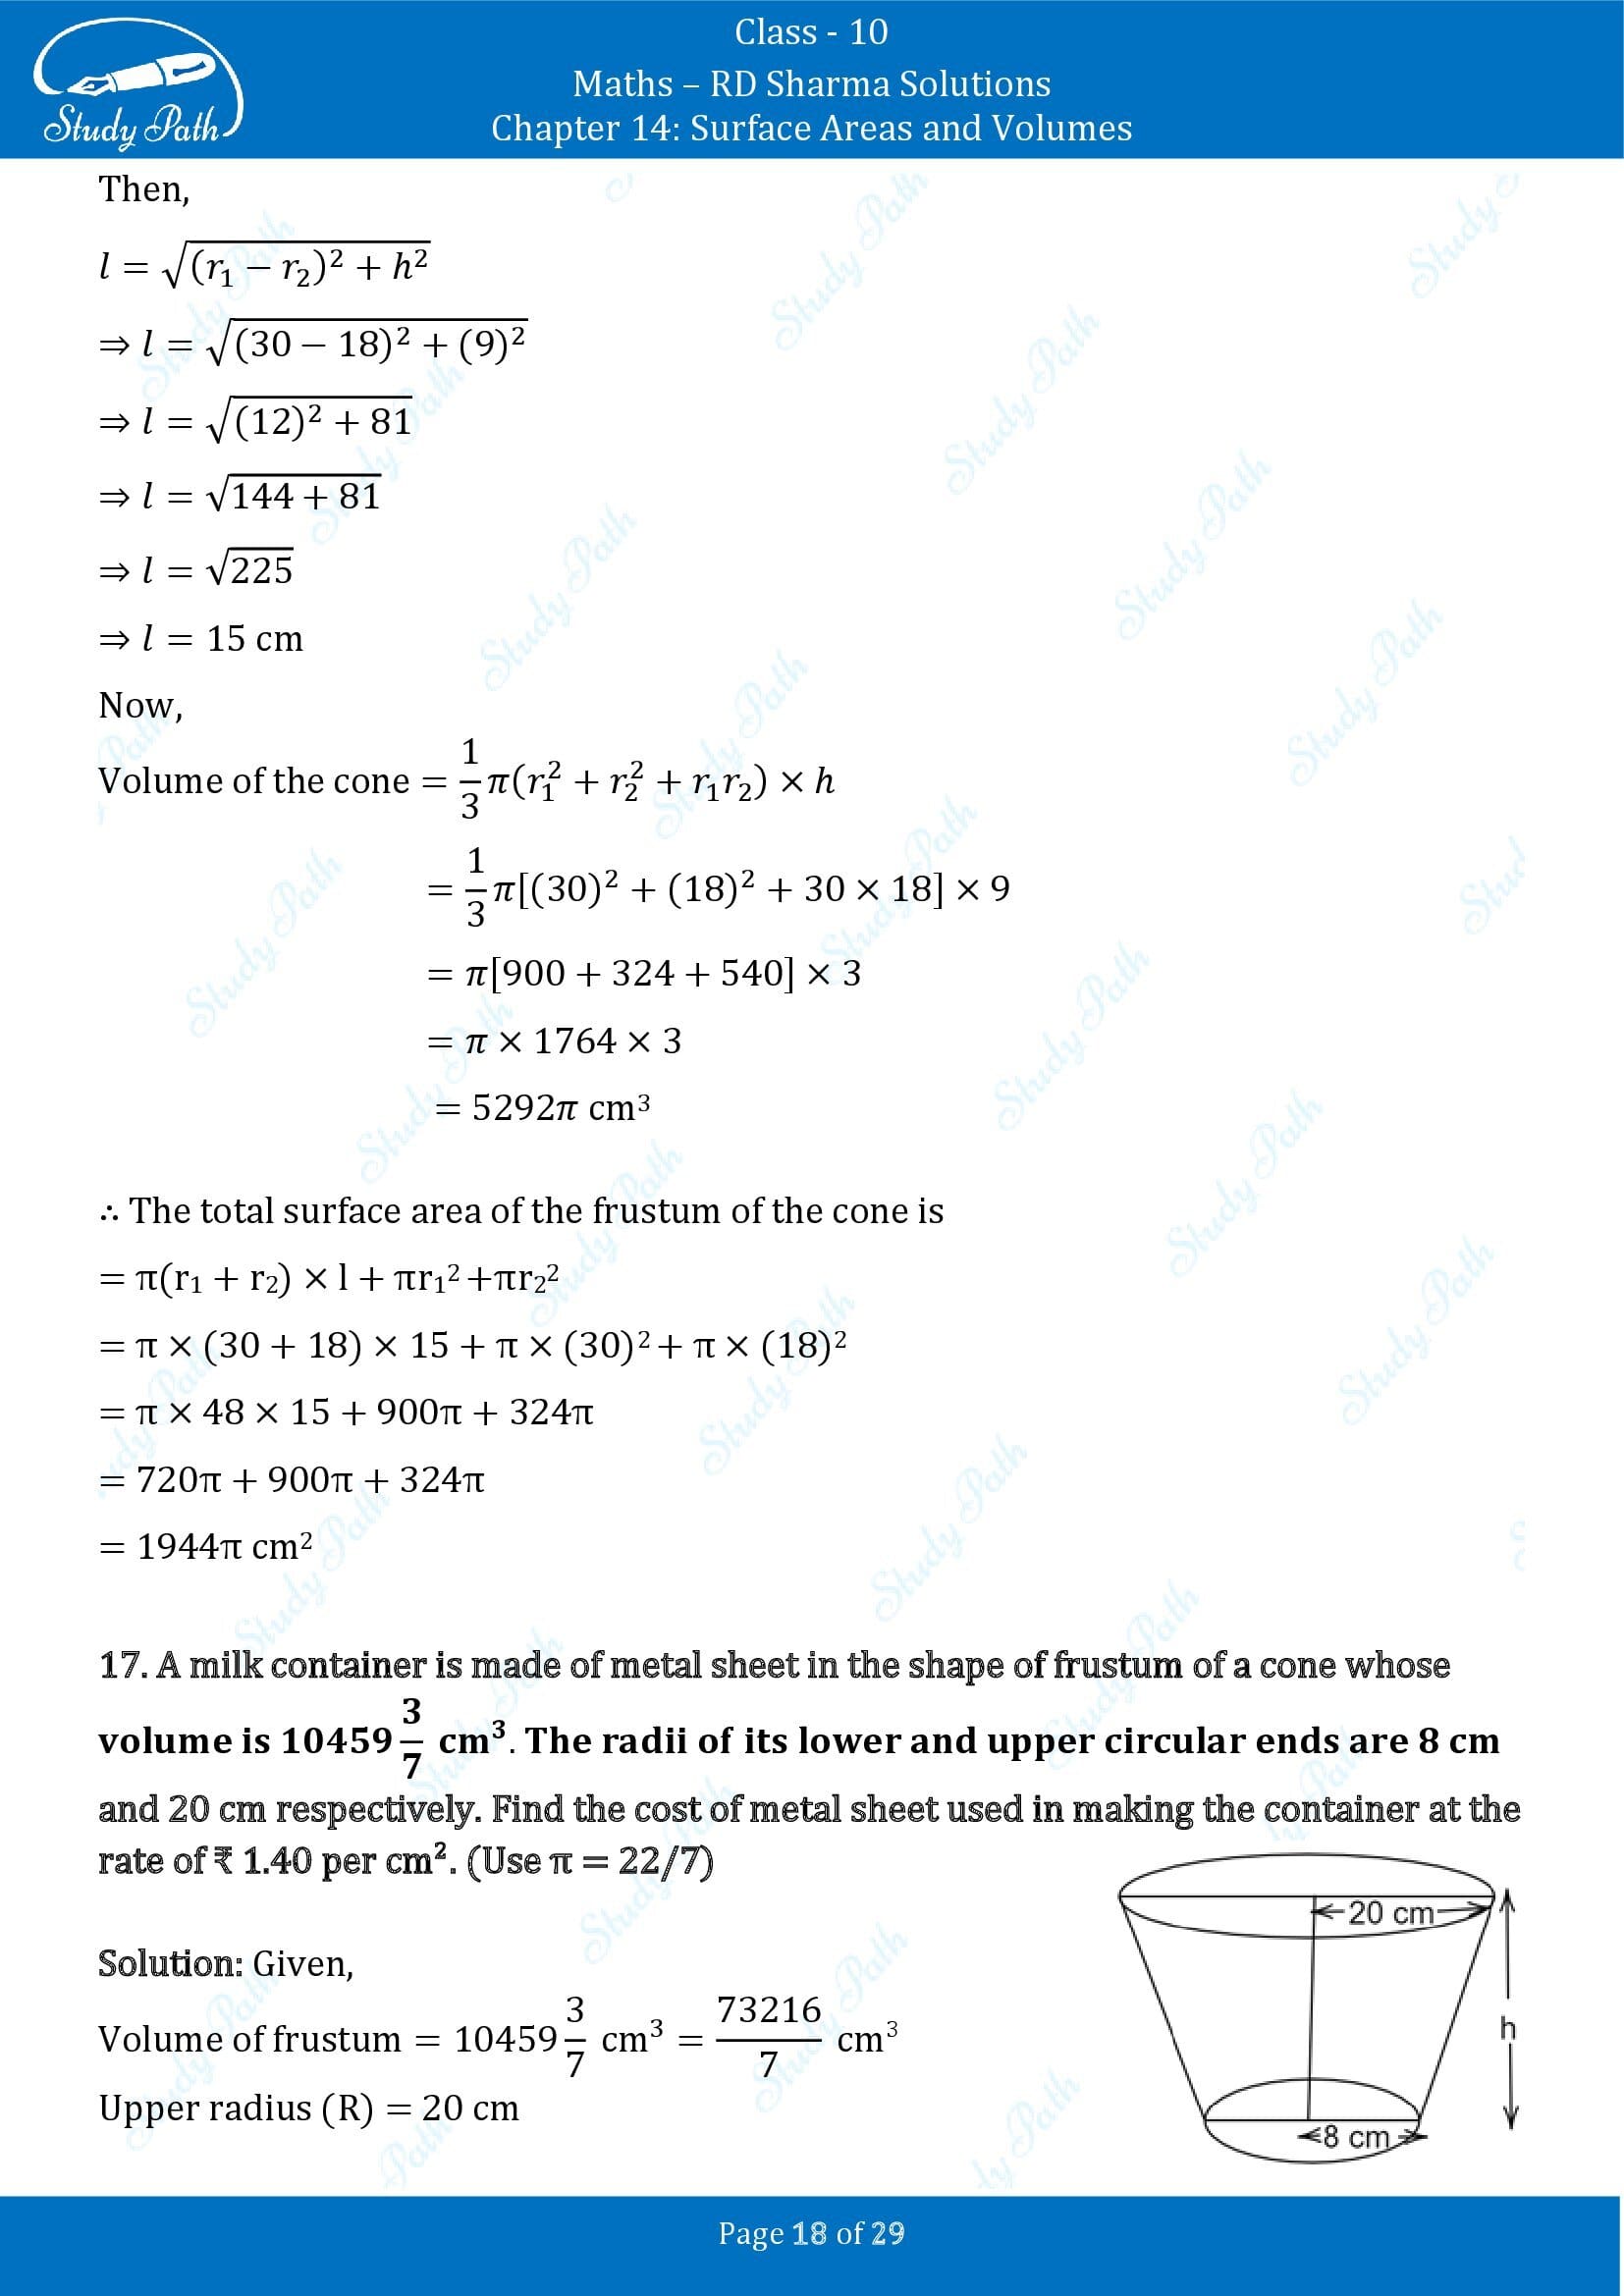 RD Sharma Solutions Class 10 Chapter 14 Surface Areas and Volumes Exercise 14.3 00018